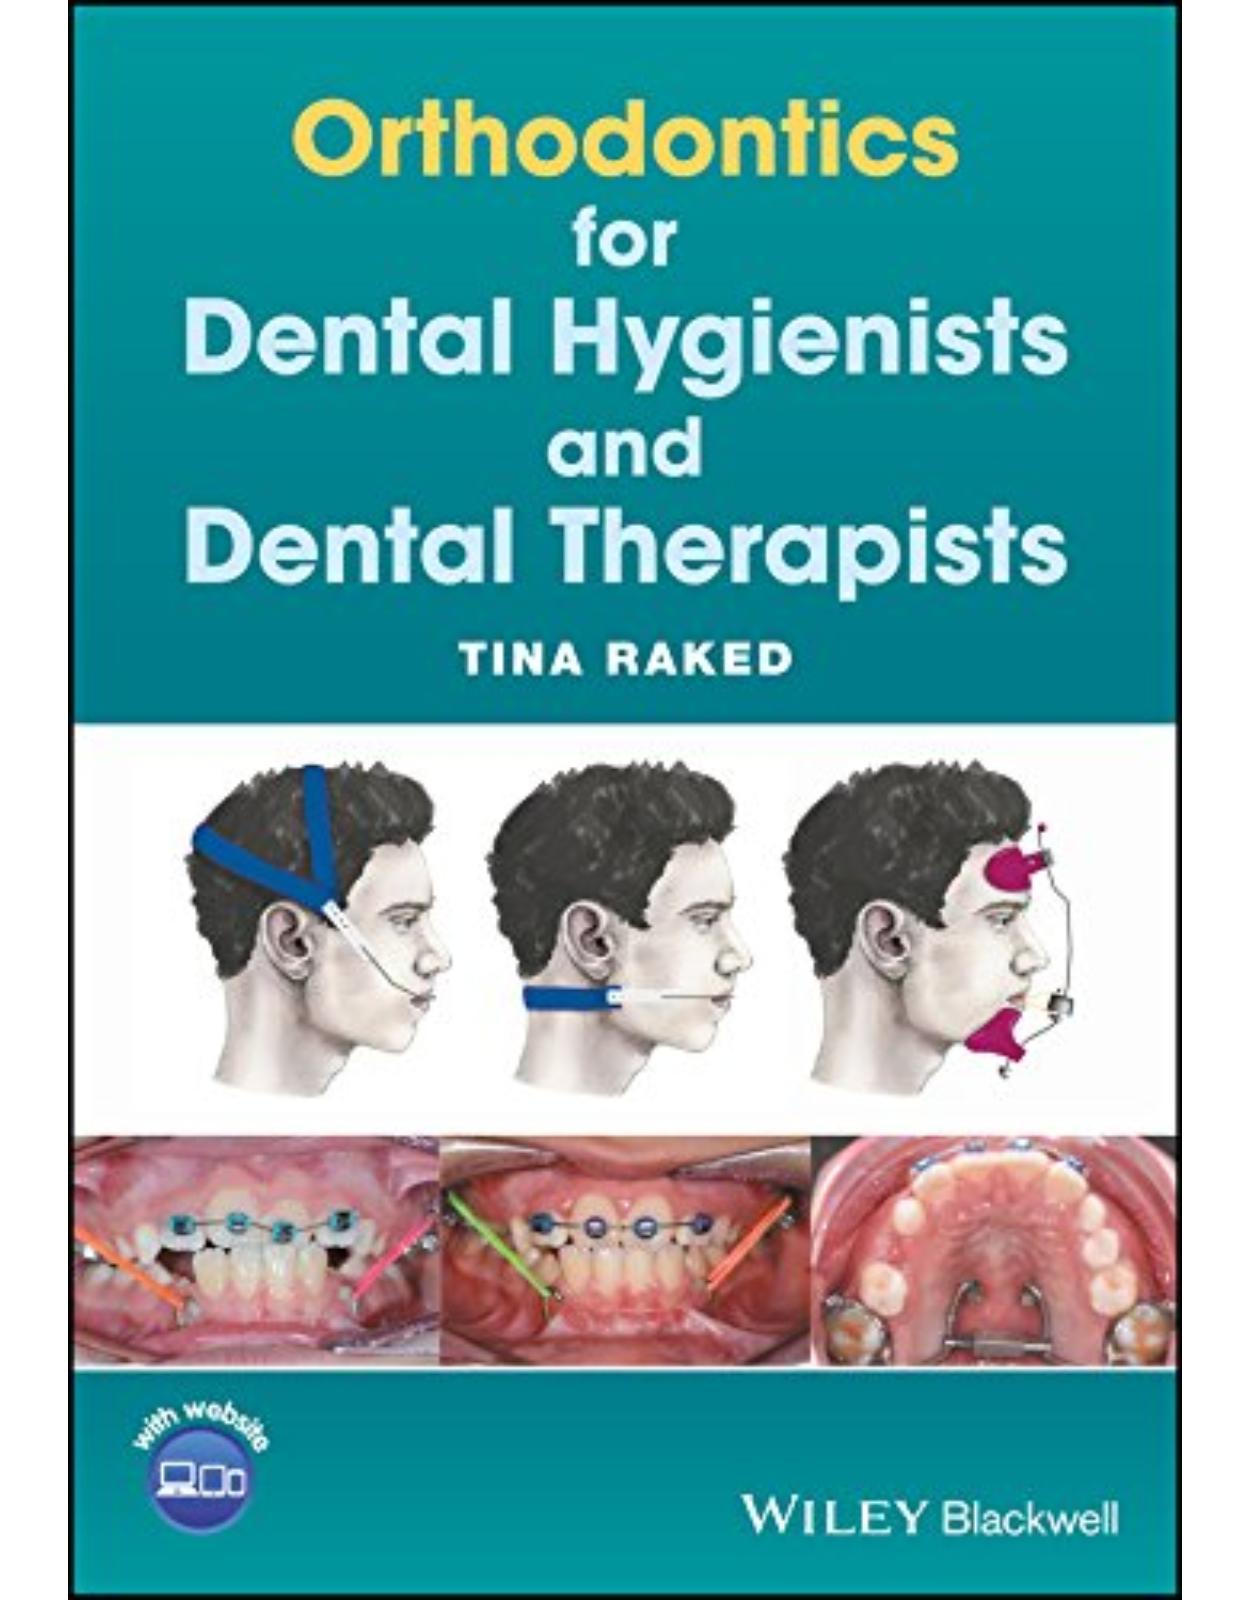 Orthodontics for Dental Hygienists and Dental Therapists